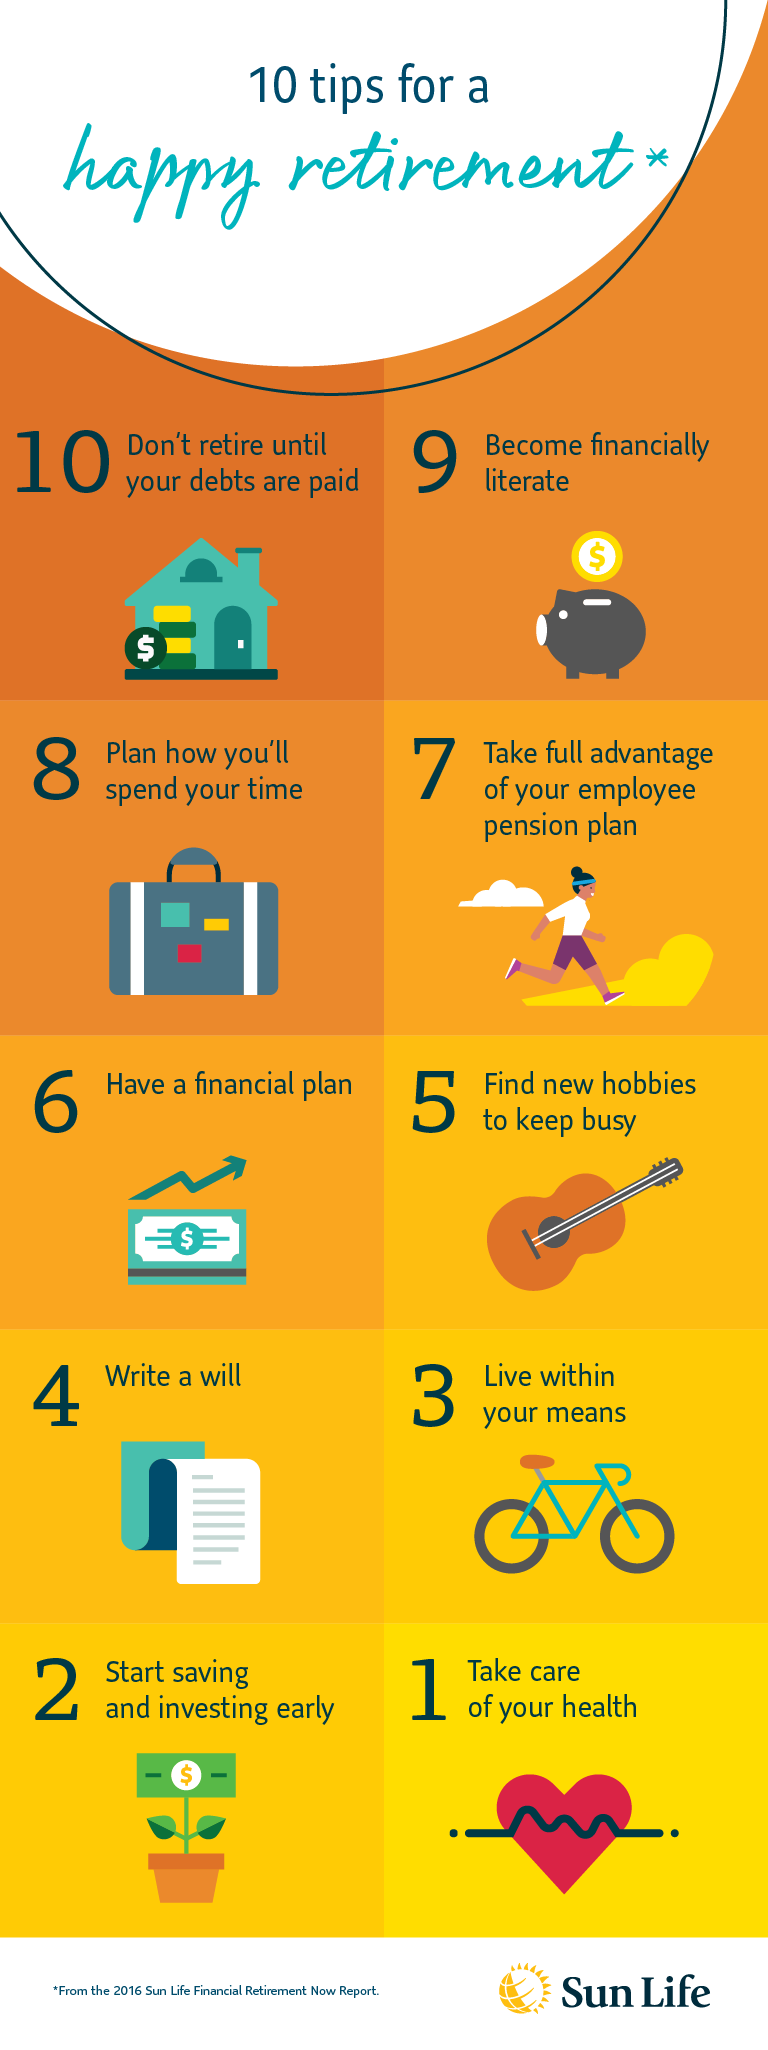 10 tips for a happy retirement (infographic) Sun Life